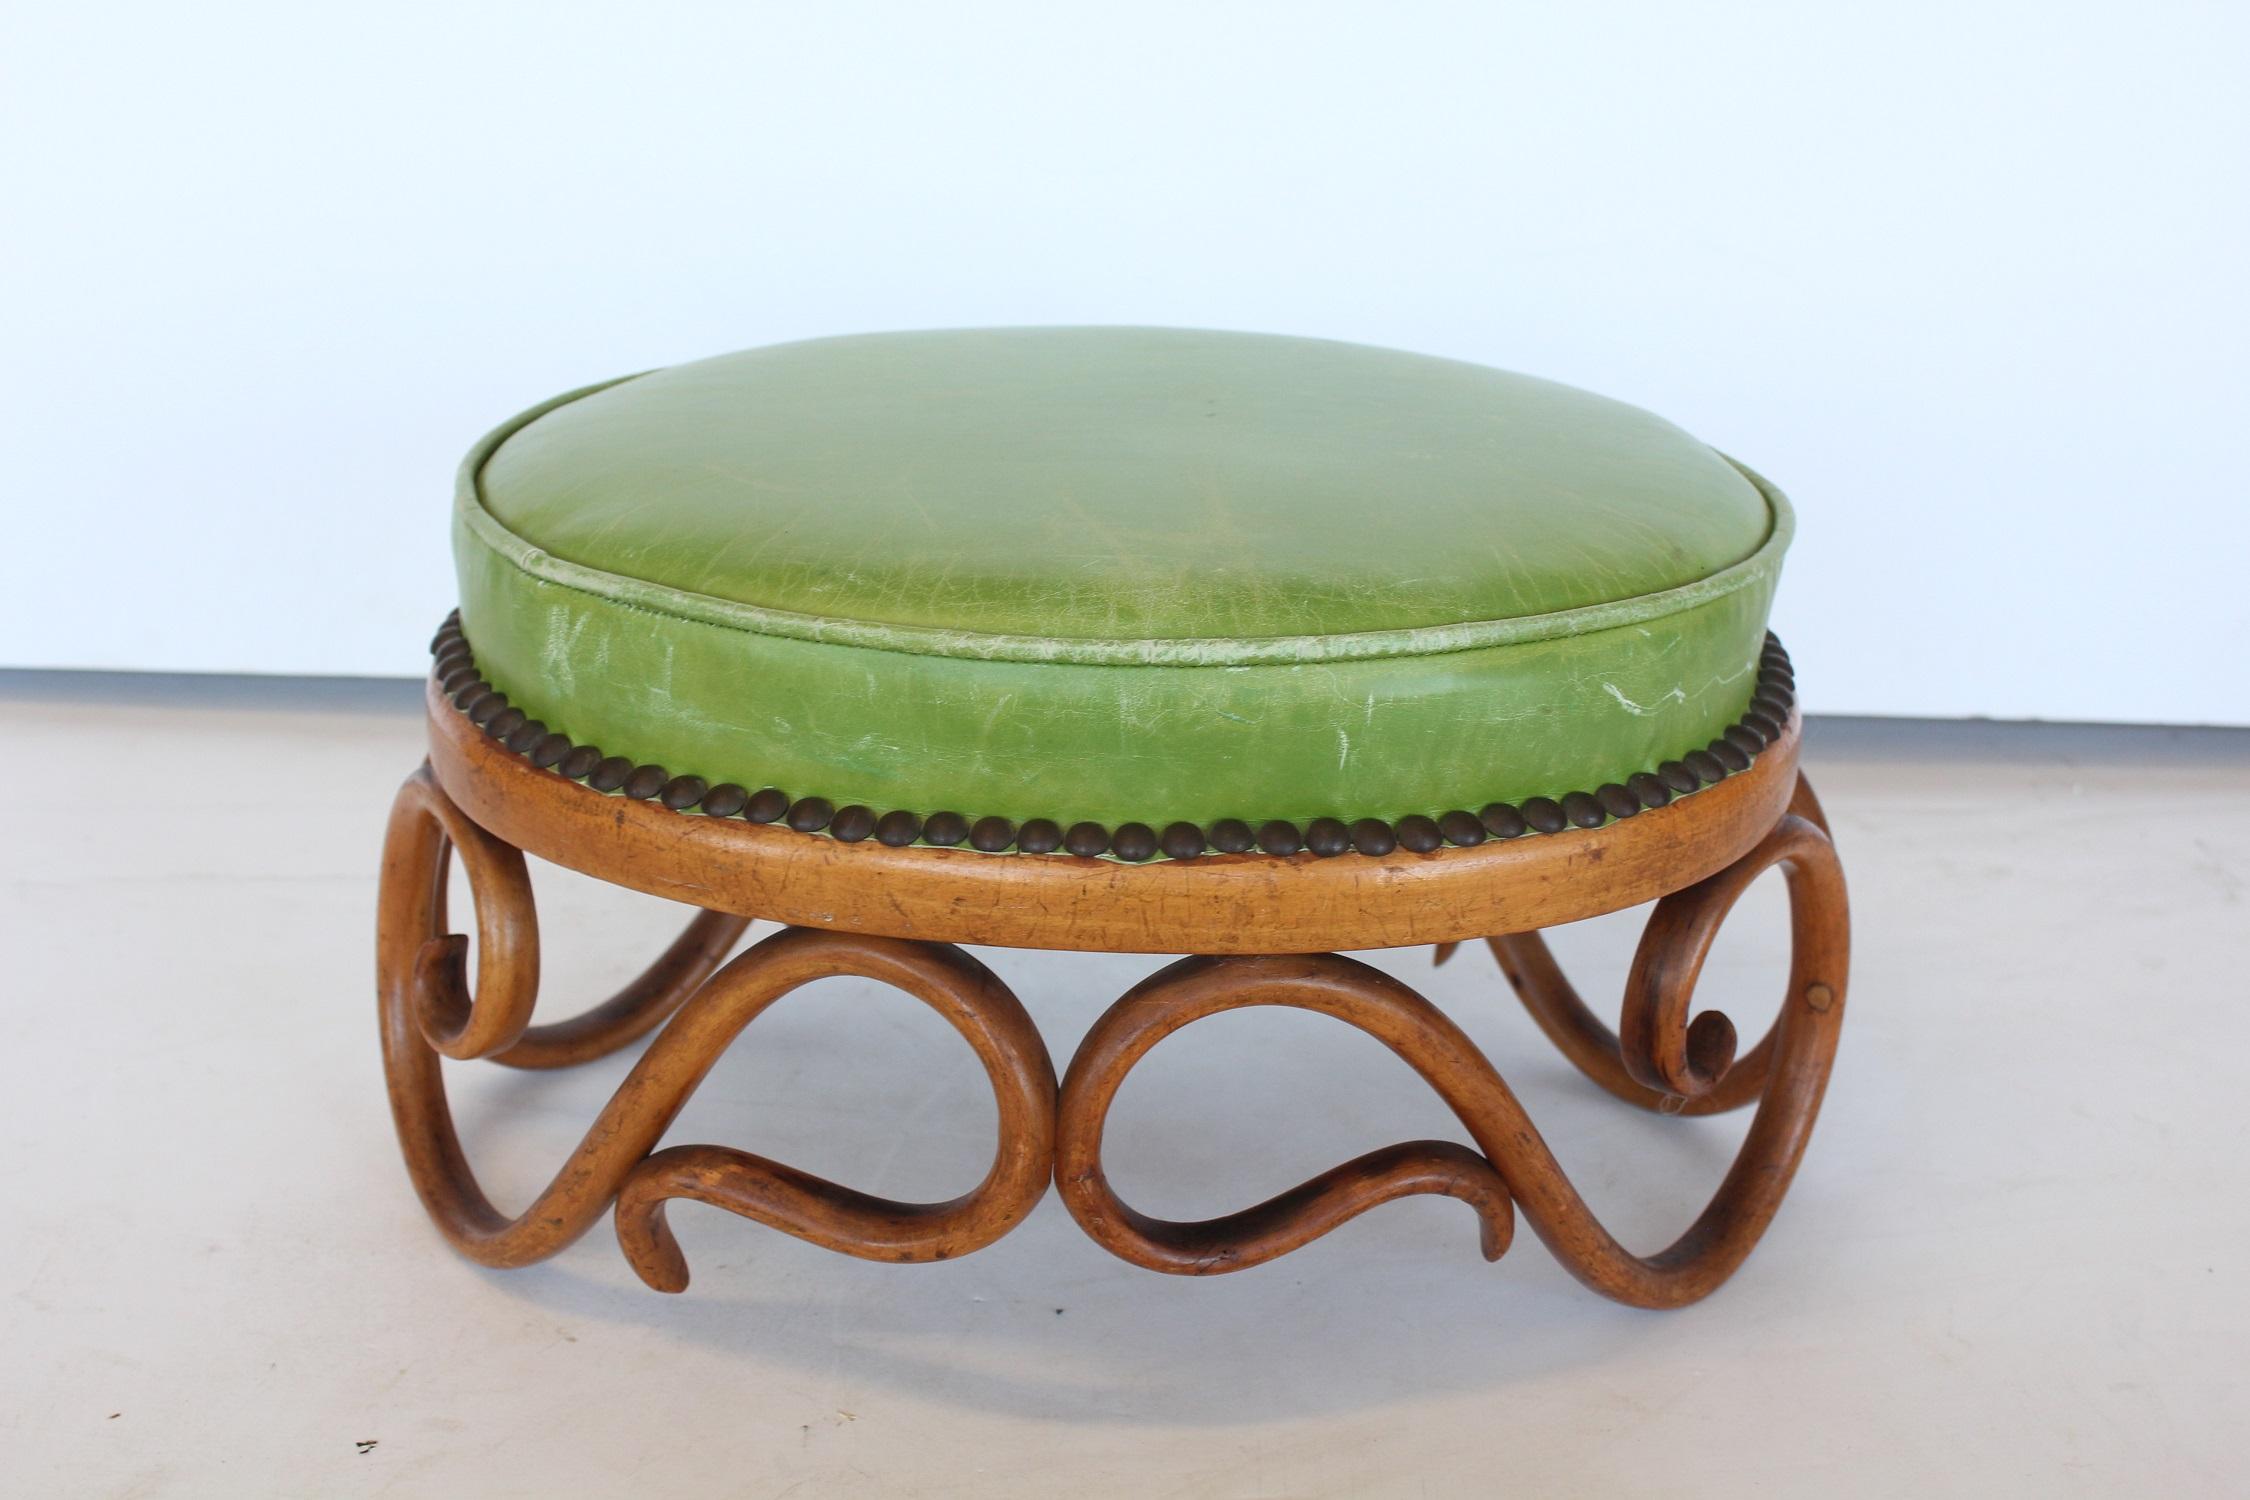 1900s bentwood and leather foot stool by Thonet. We have two available.